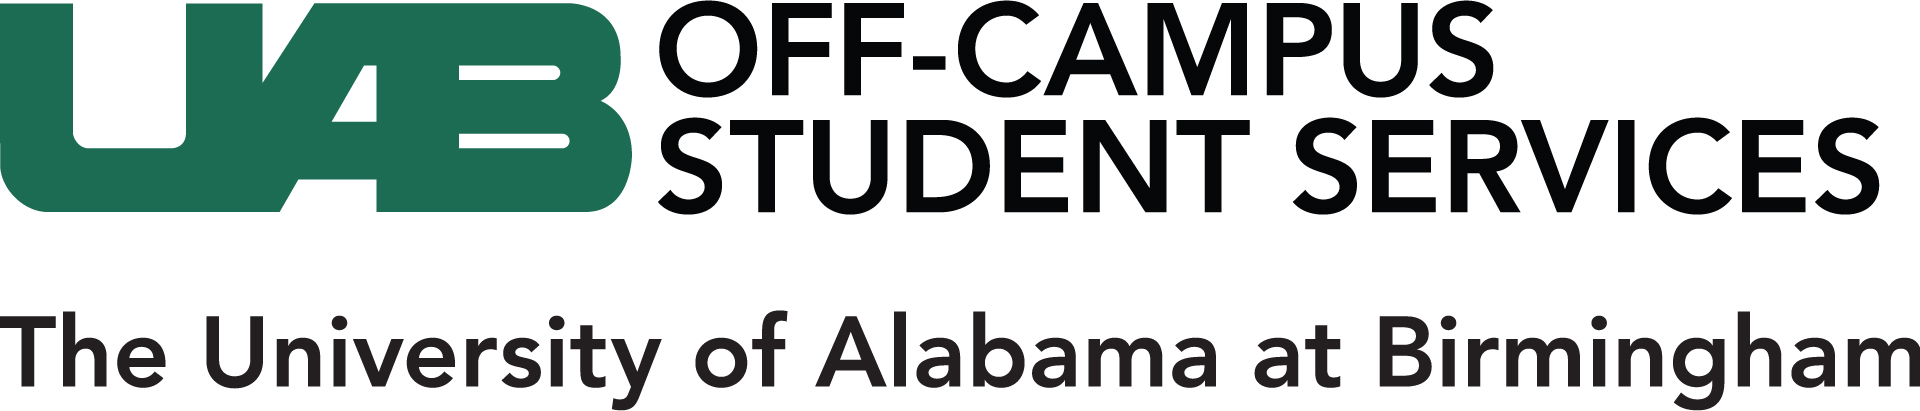 off campus student services logo